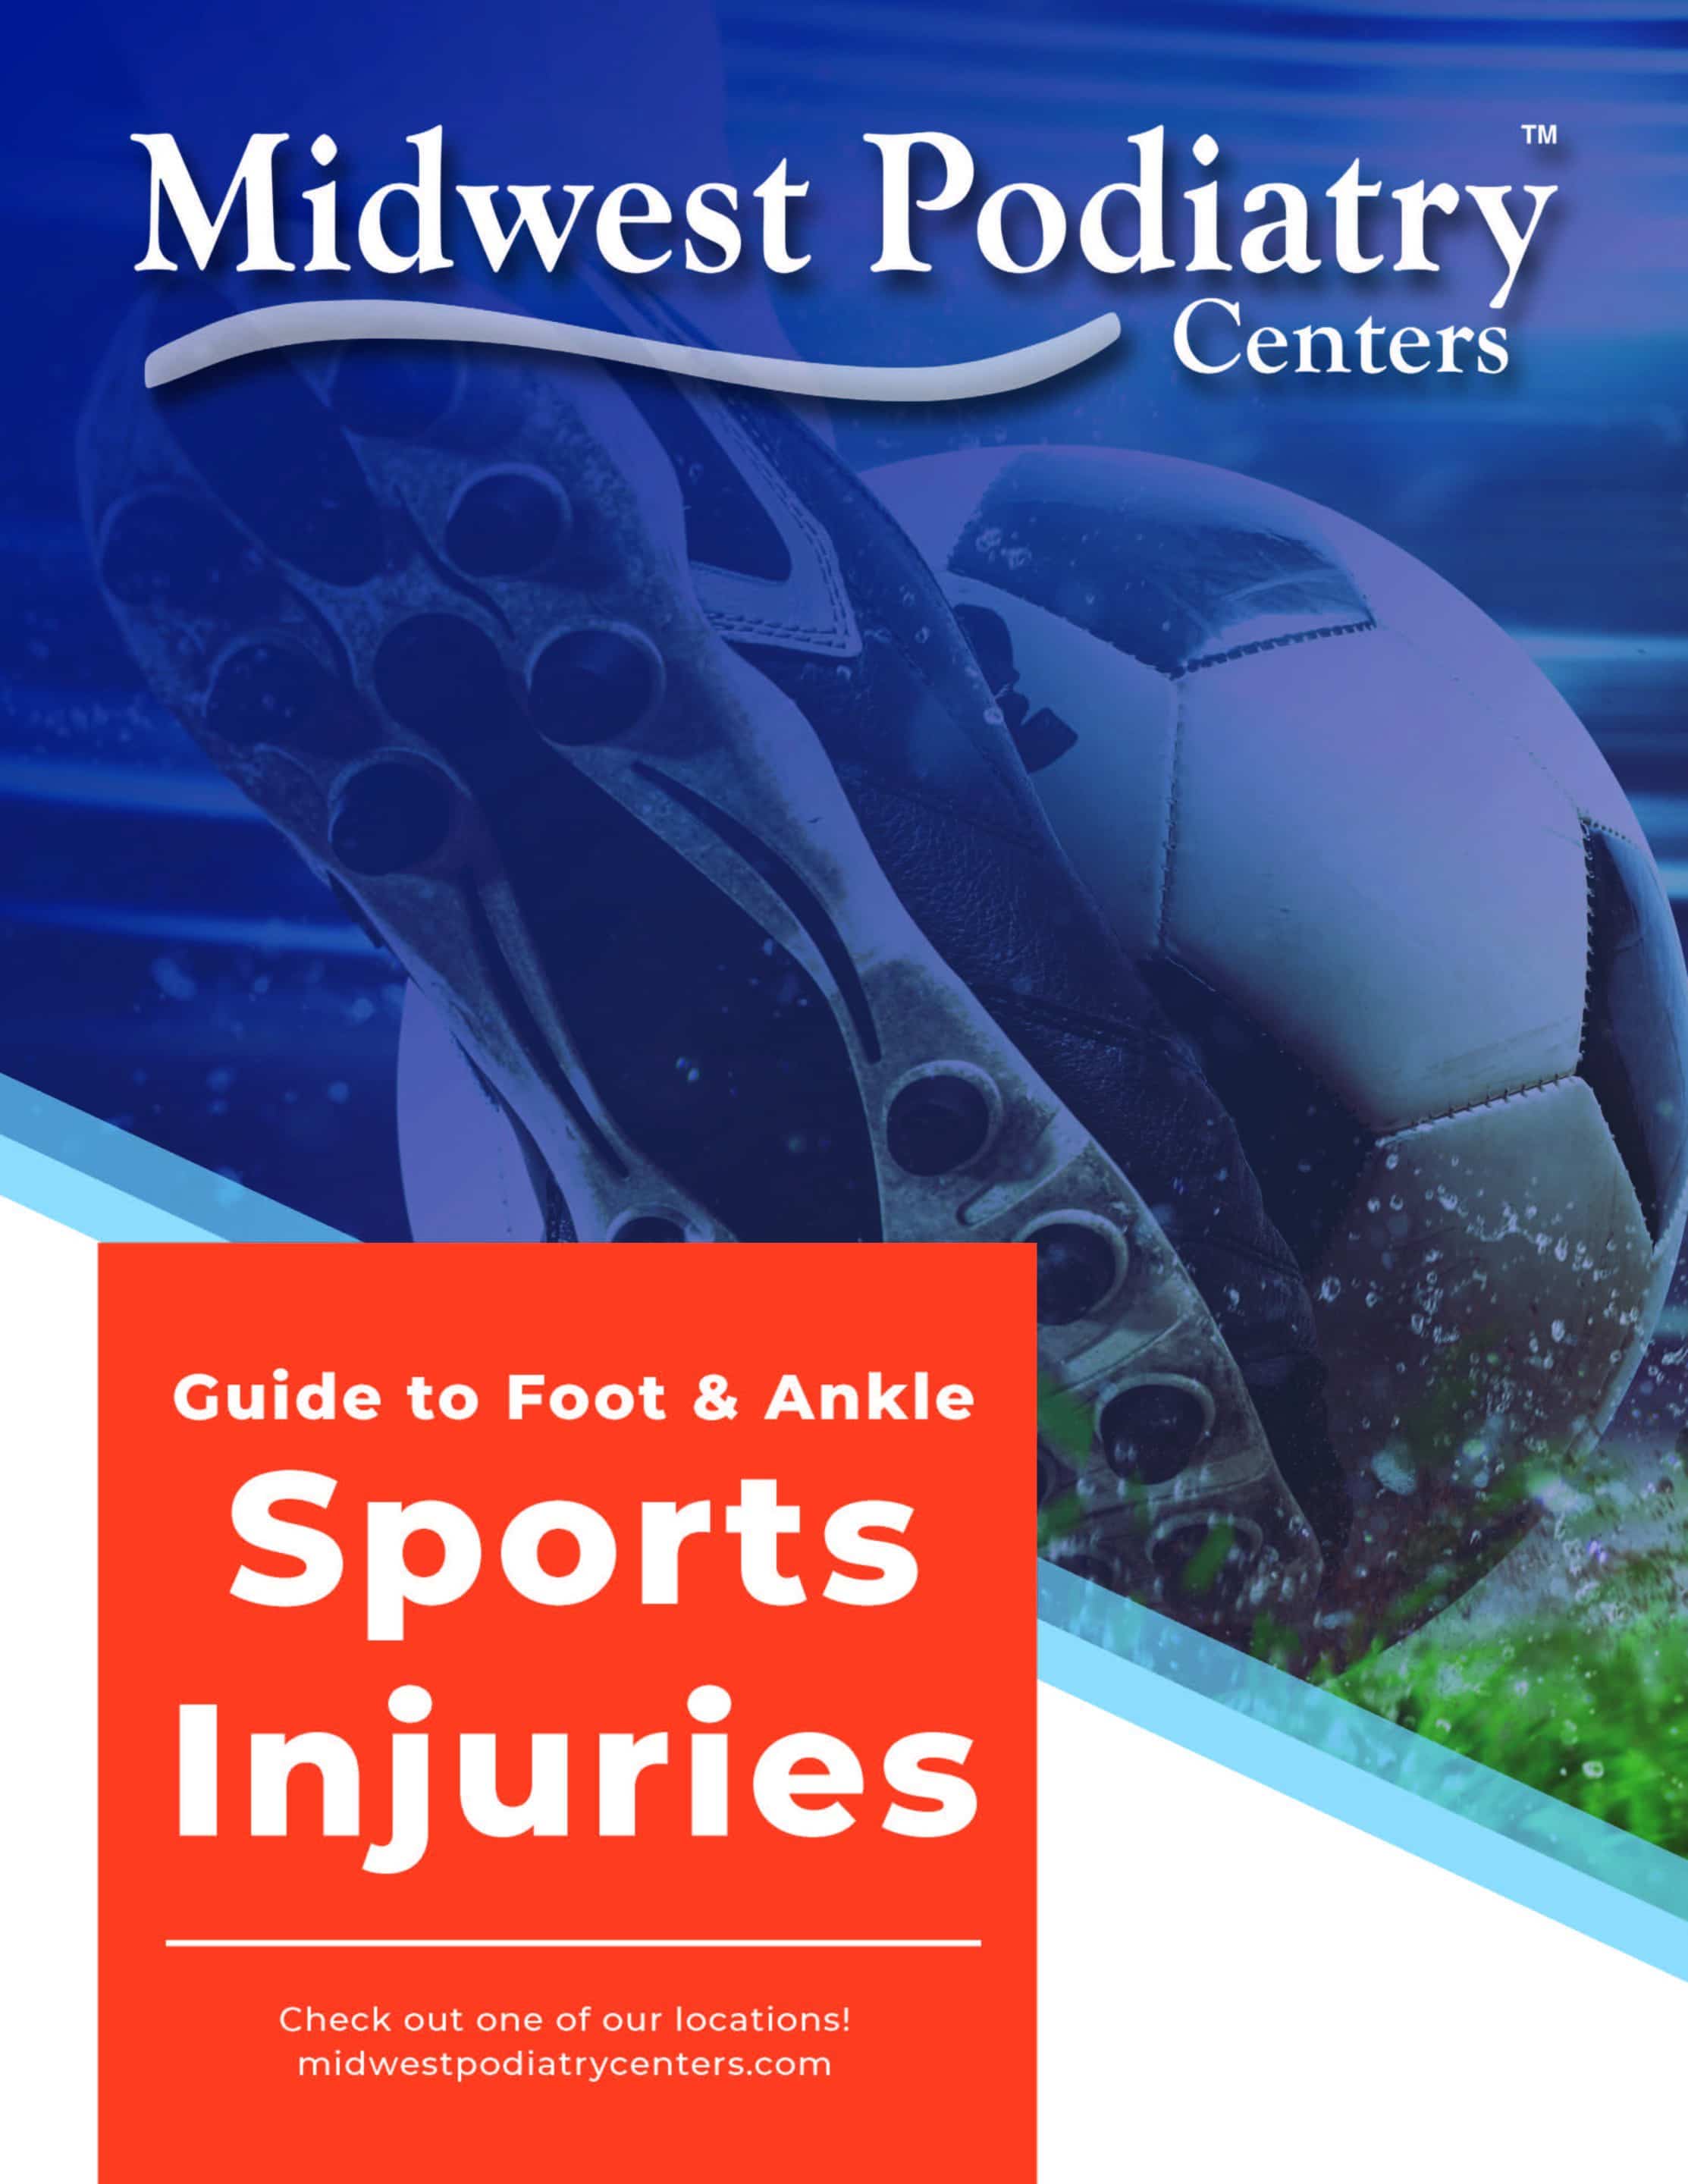 Guide to Foot & Ankle Sports Injuries 